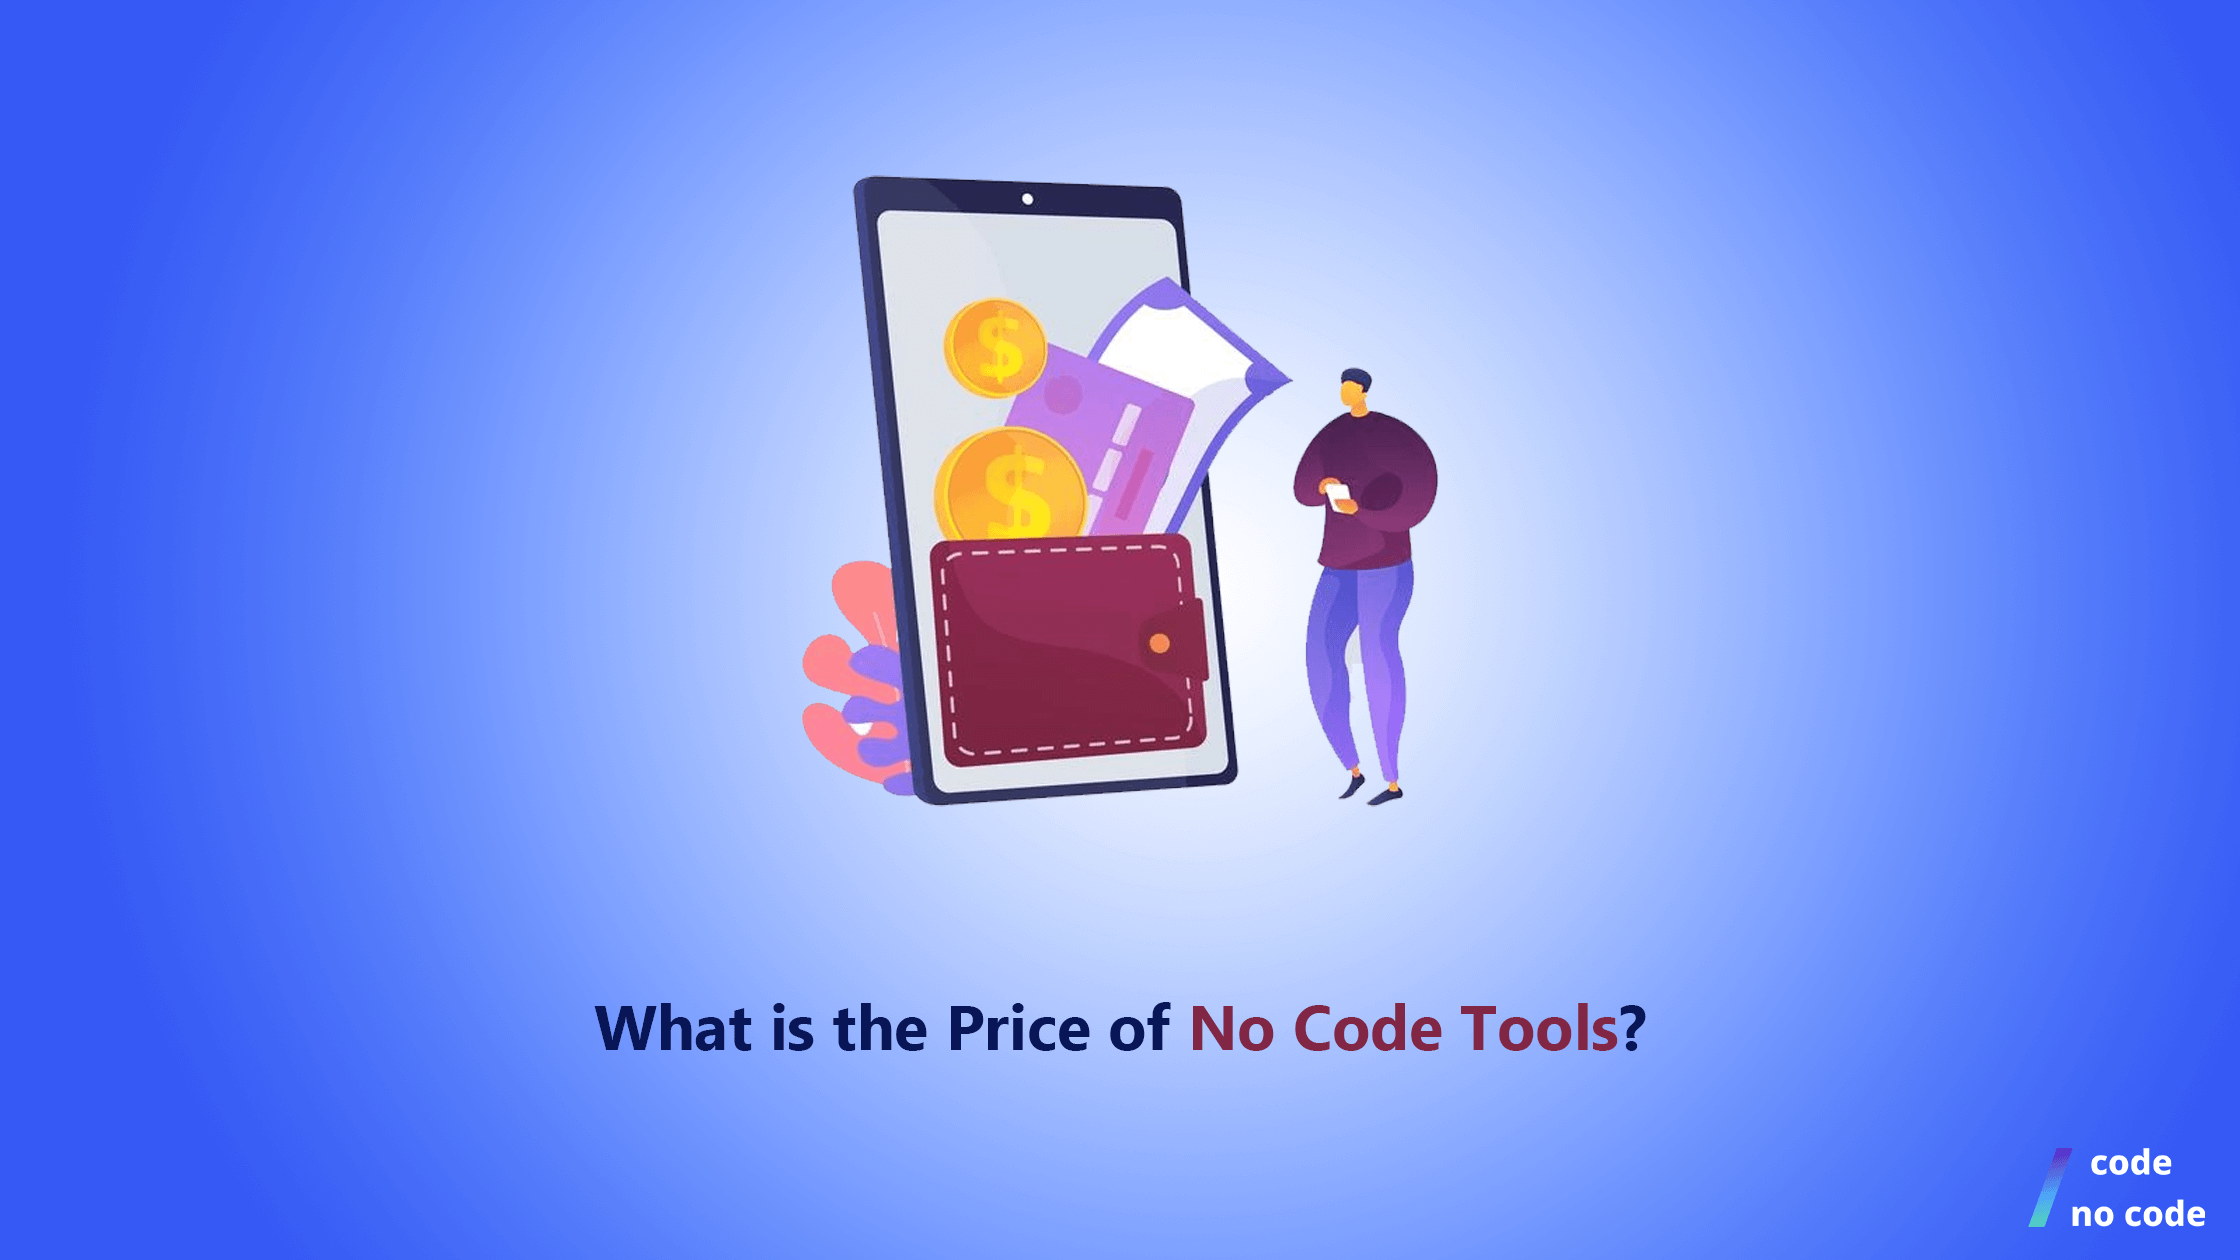 Illustration of a man standing next to a smartphone with the text "what is the price of no code tools"